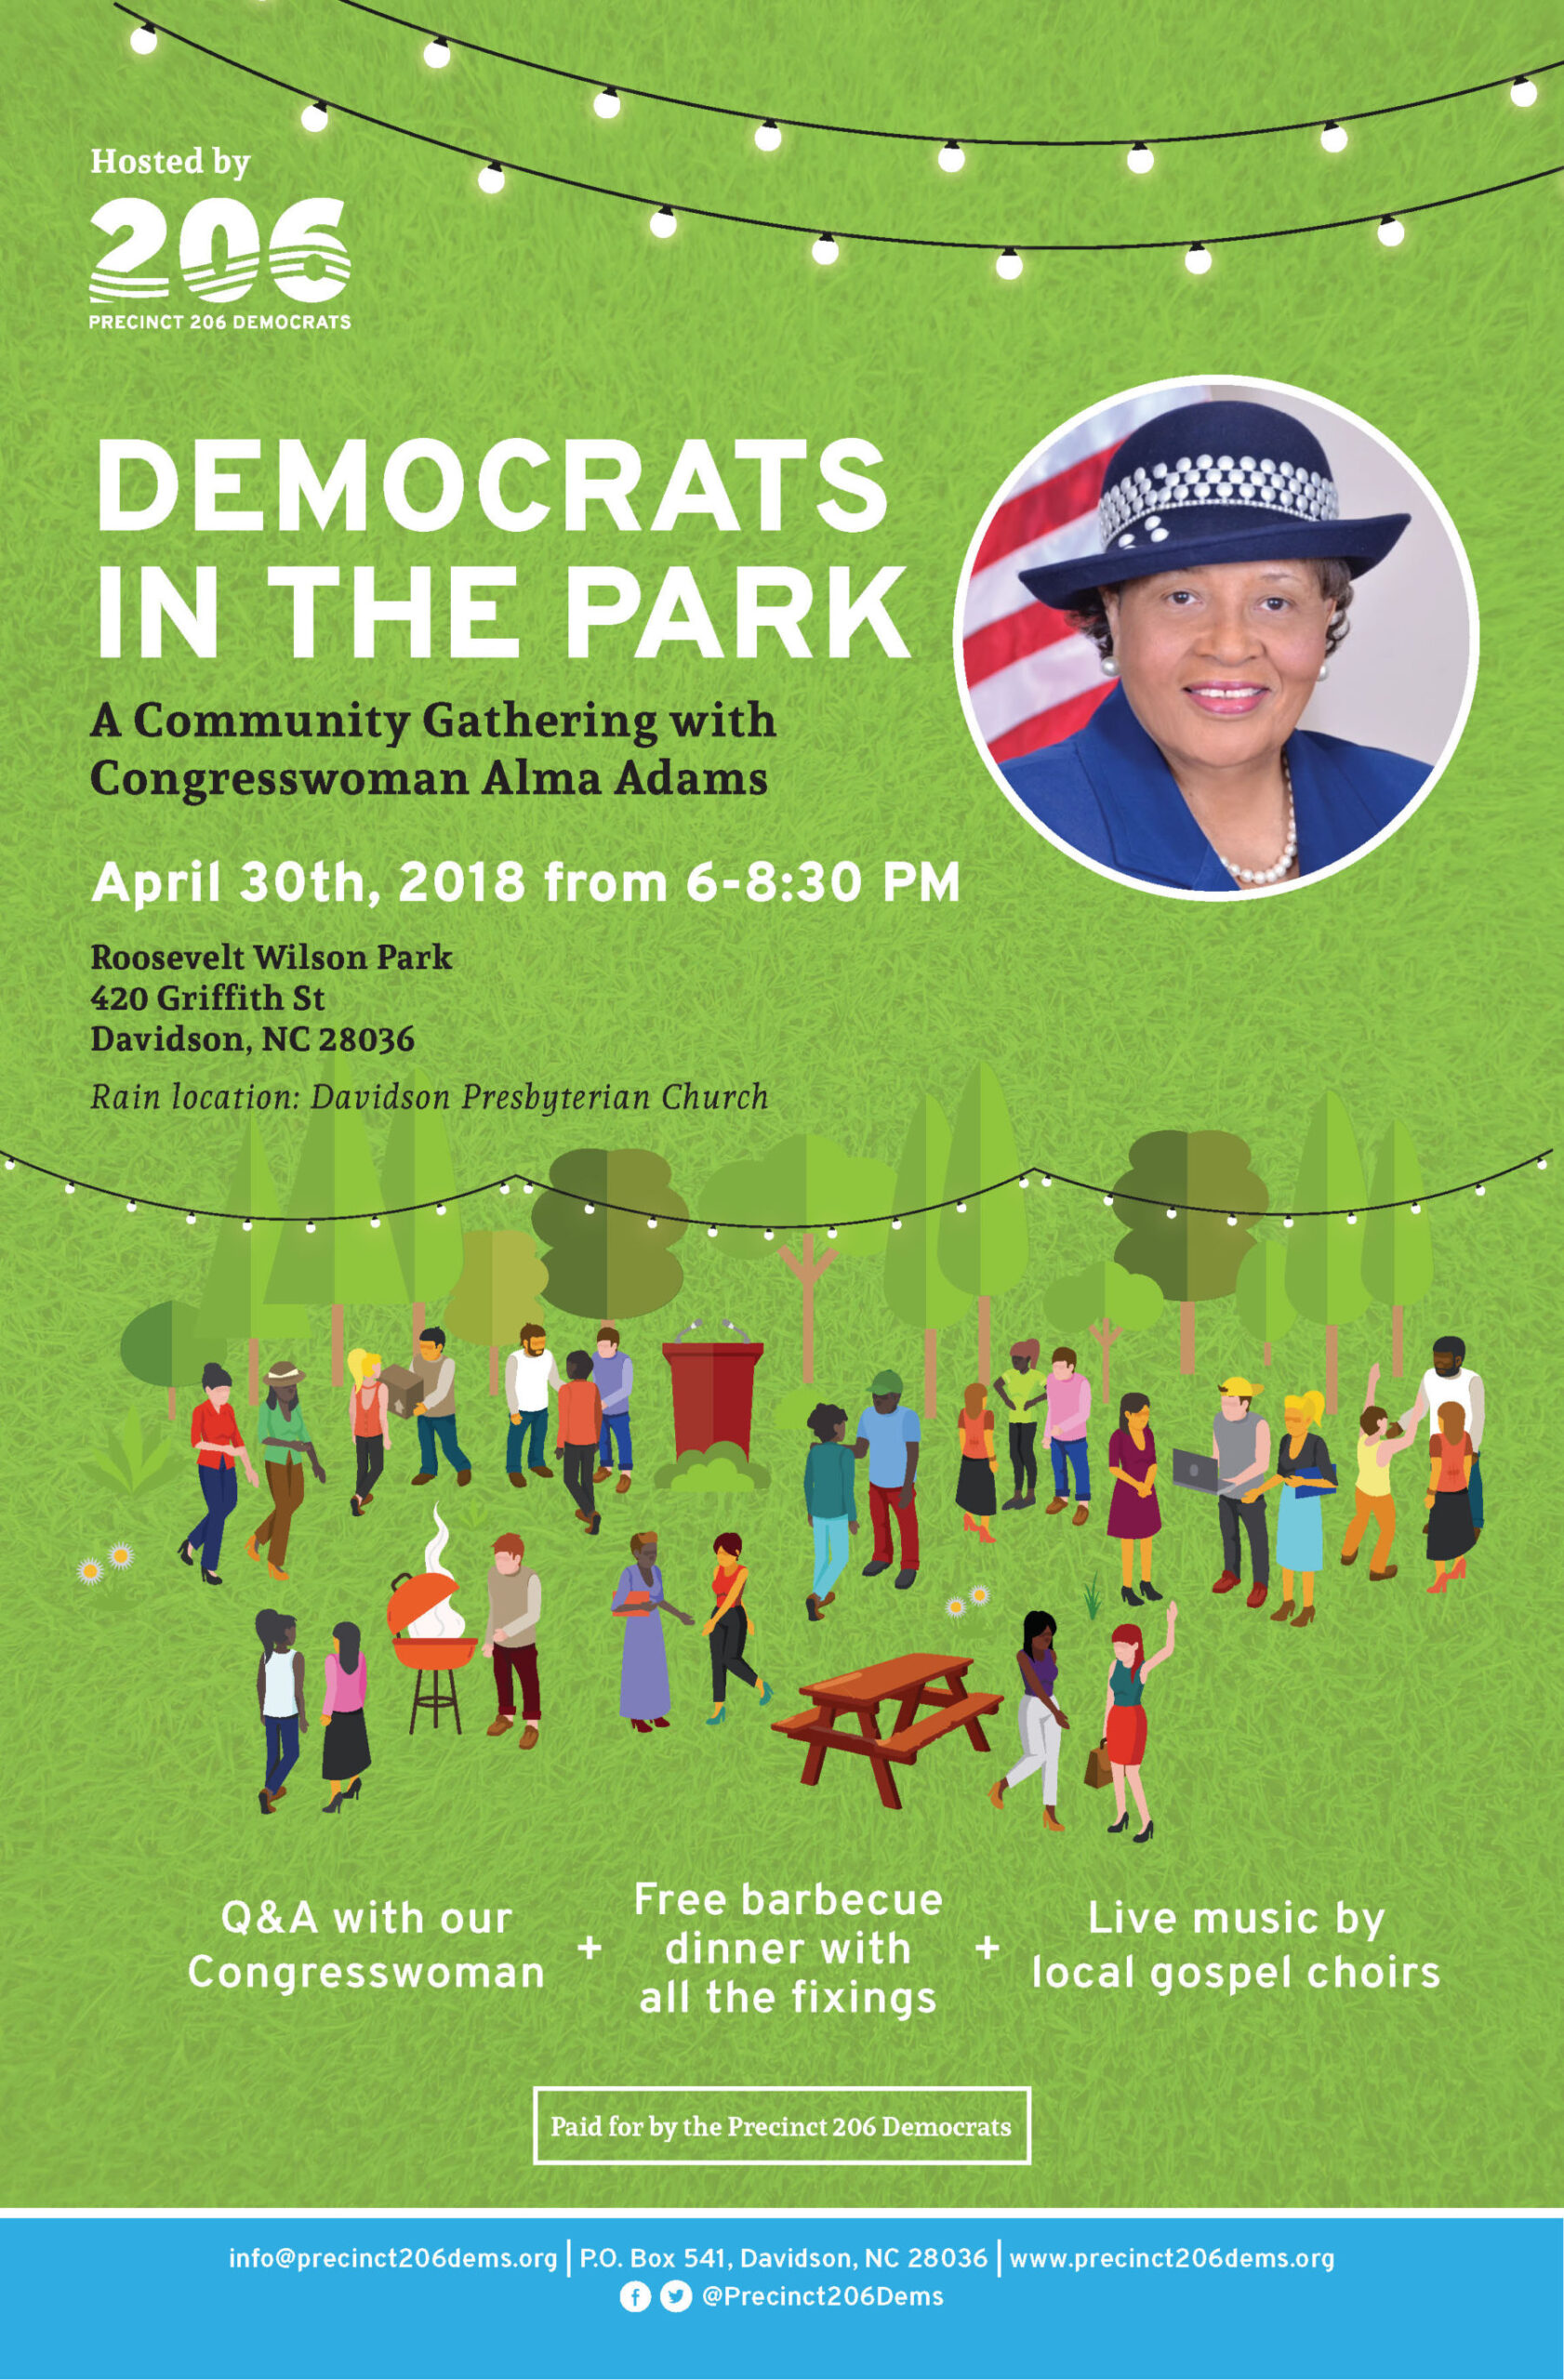 Democrats in the Park, a community gathering with Congresswoman Alma Adams on Monday, April 30, from 6-8:30pm